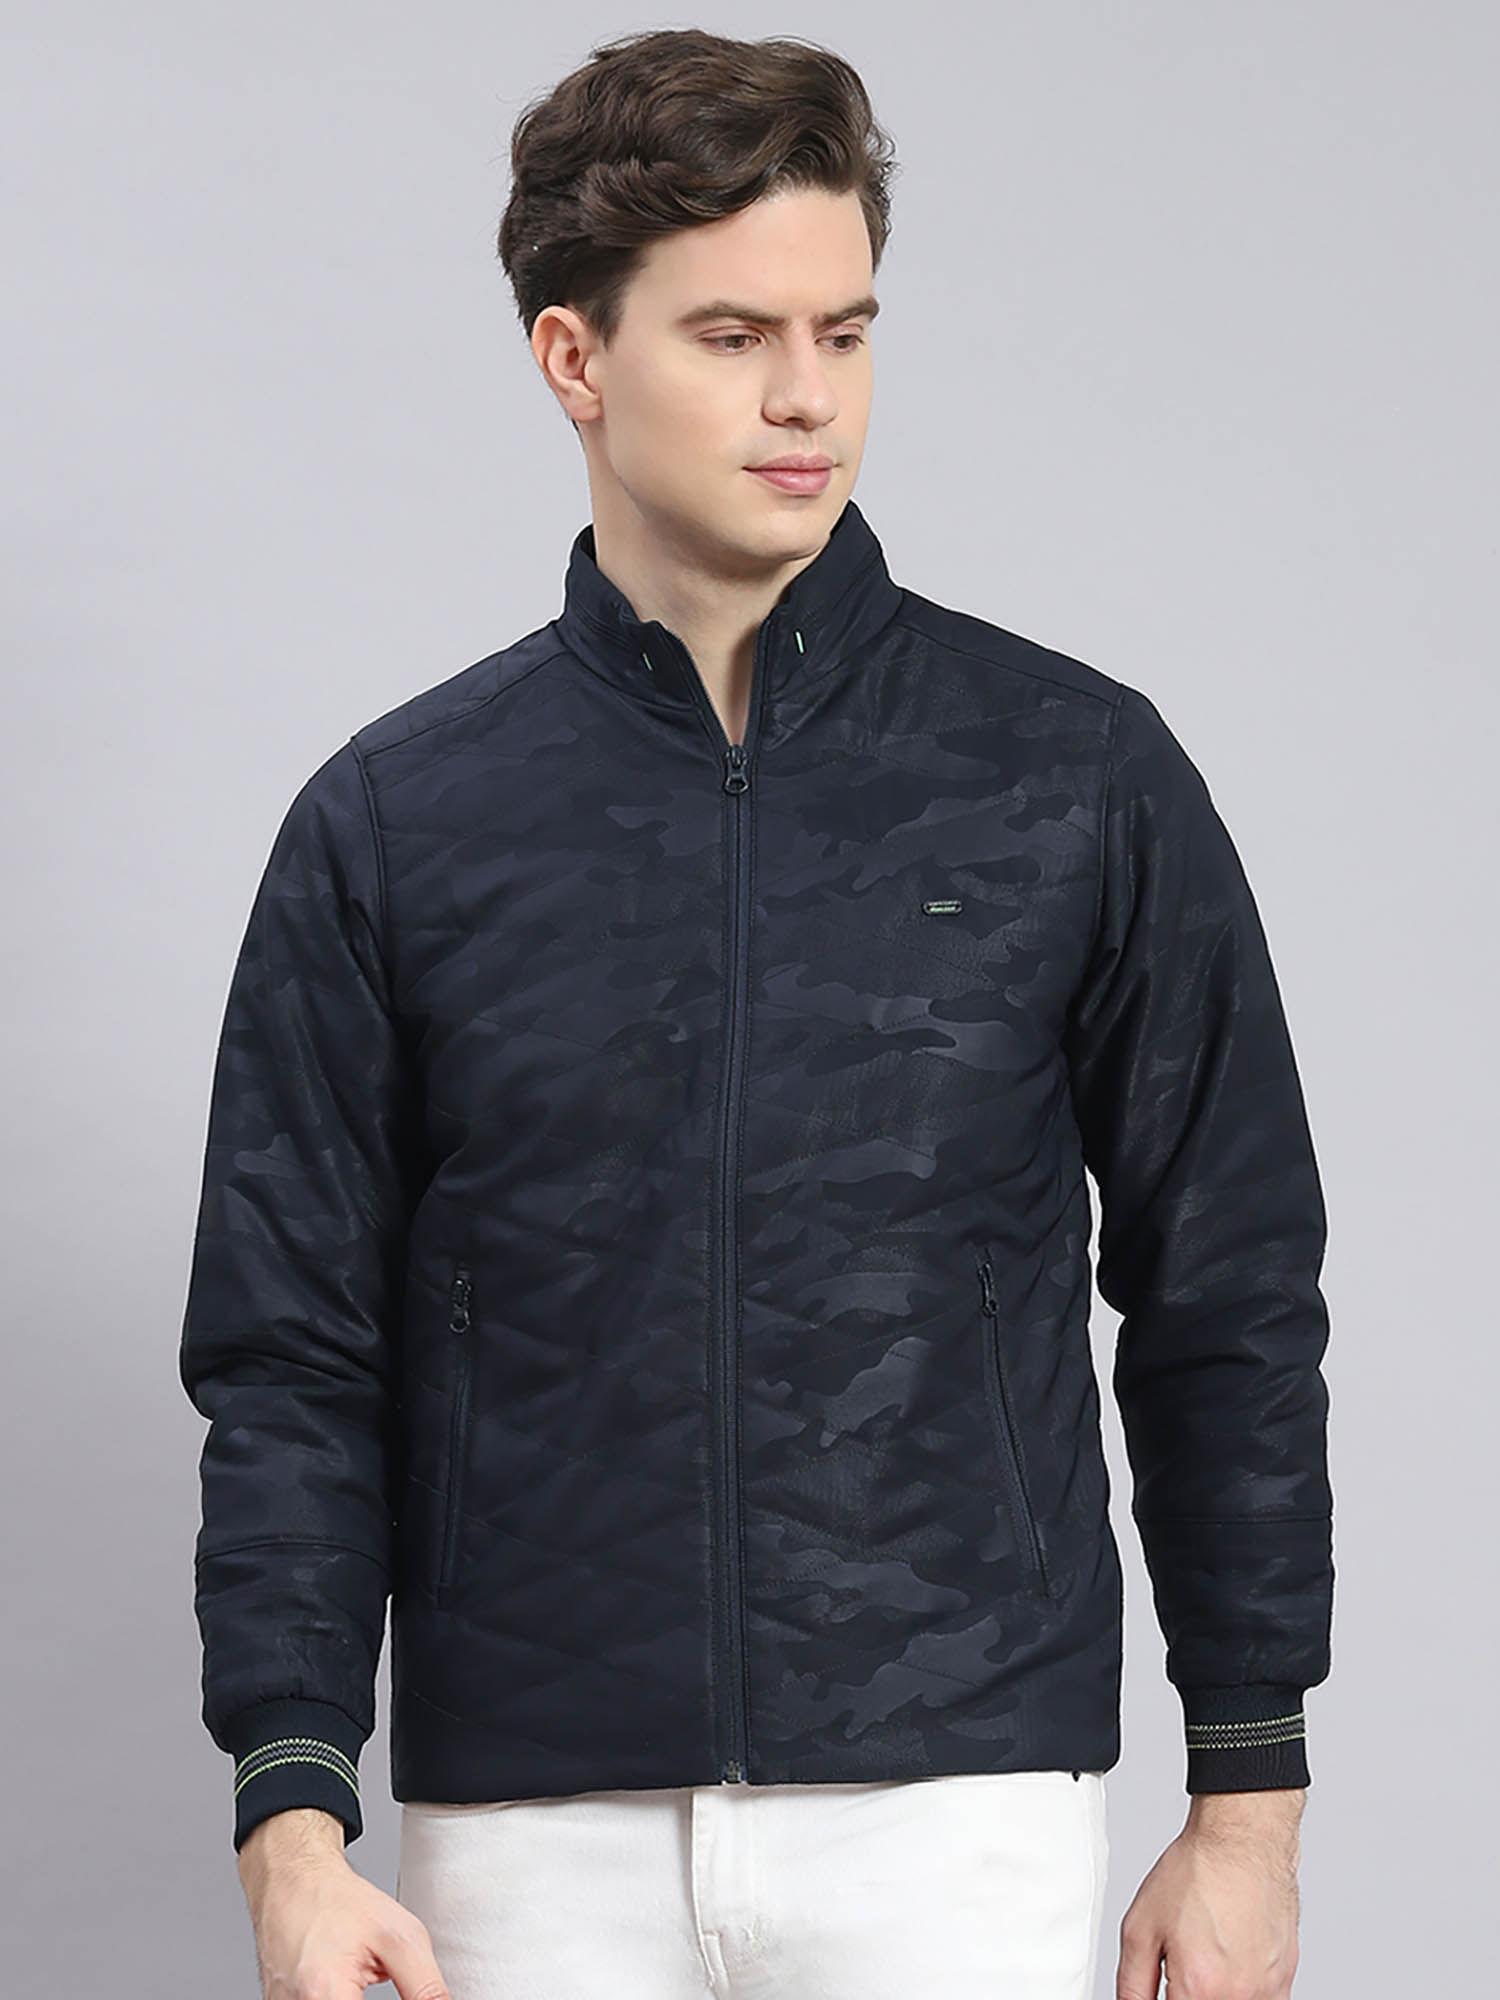 navy-blue-solid-stand-collar-jacket